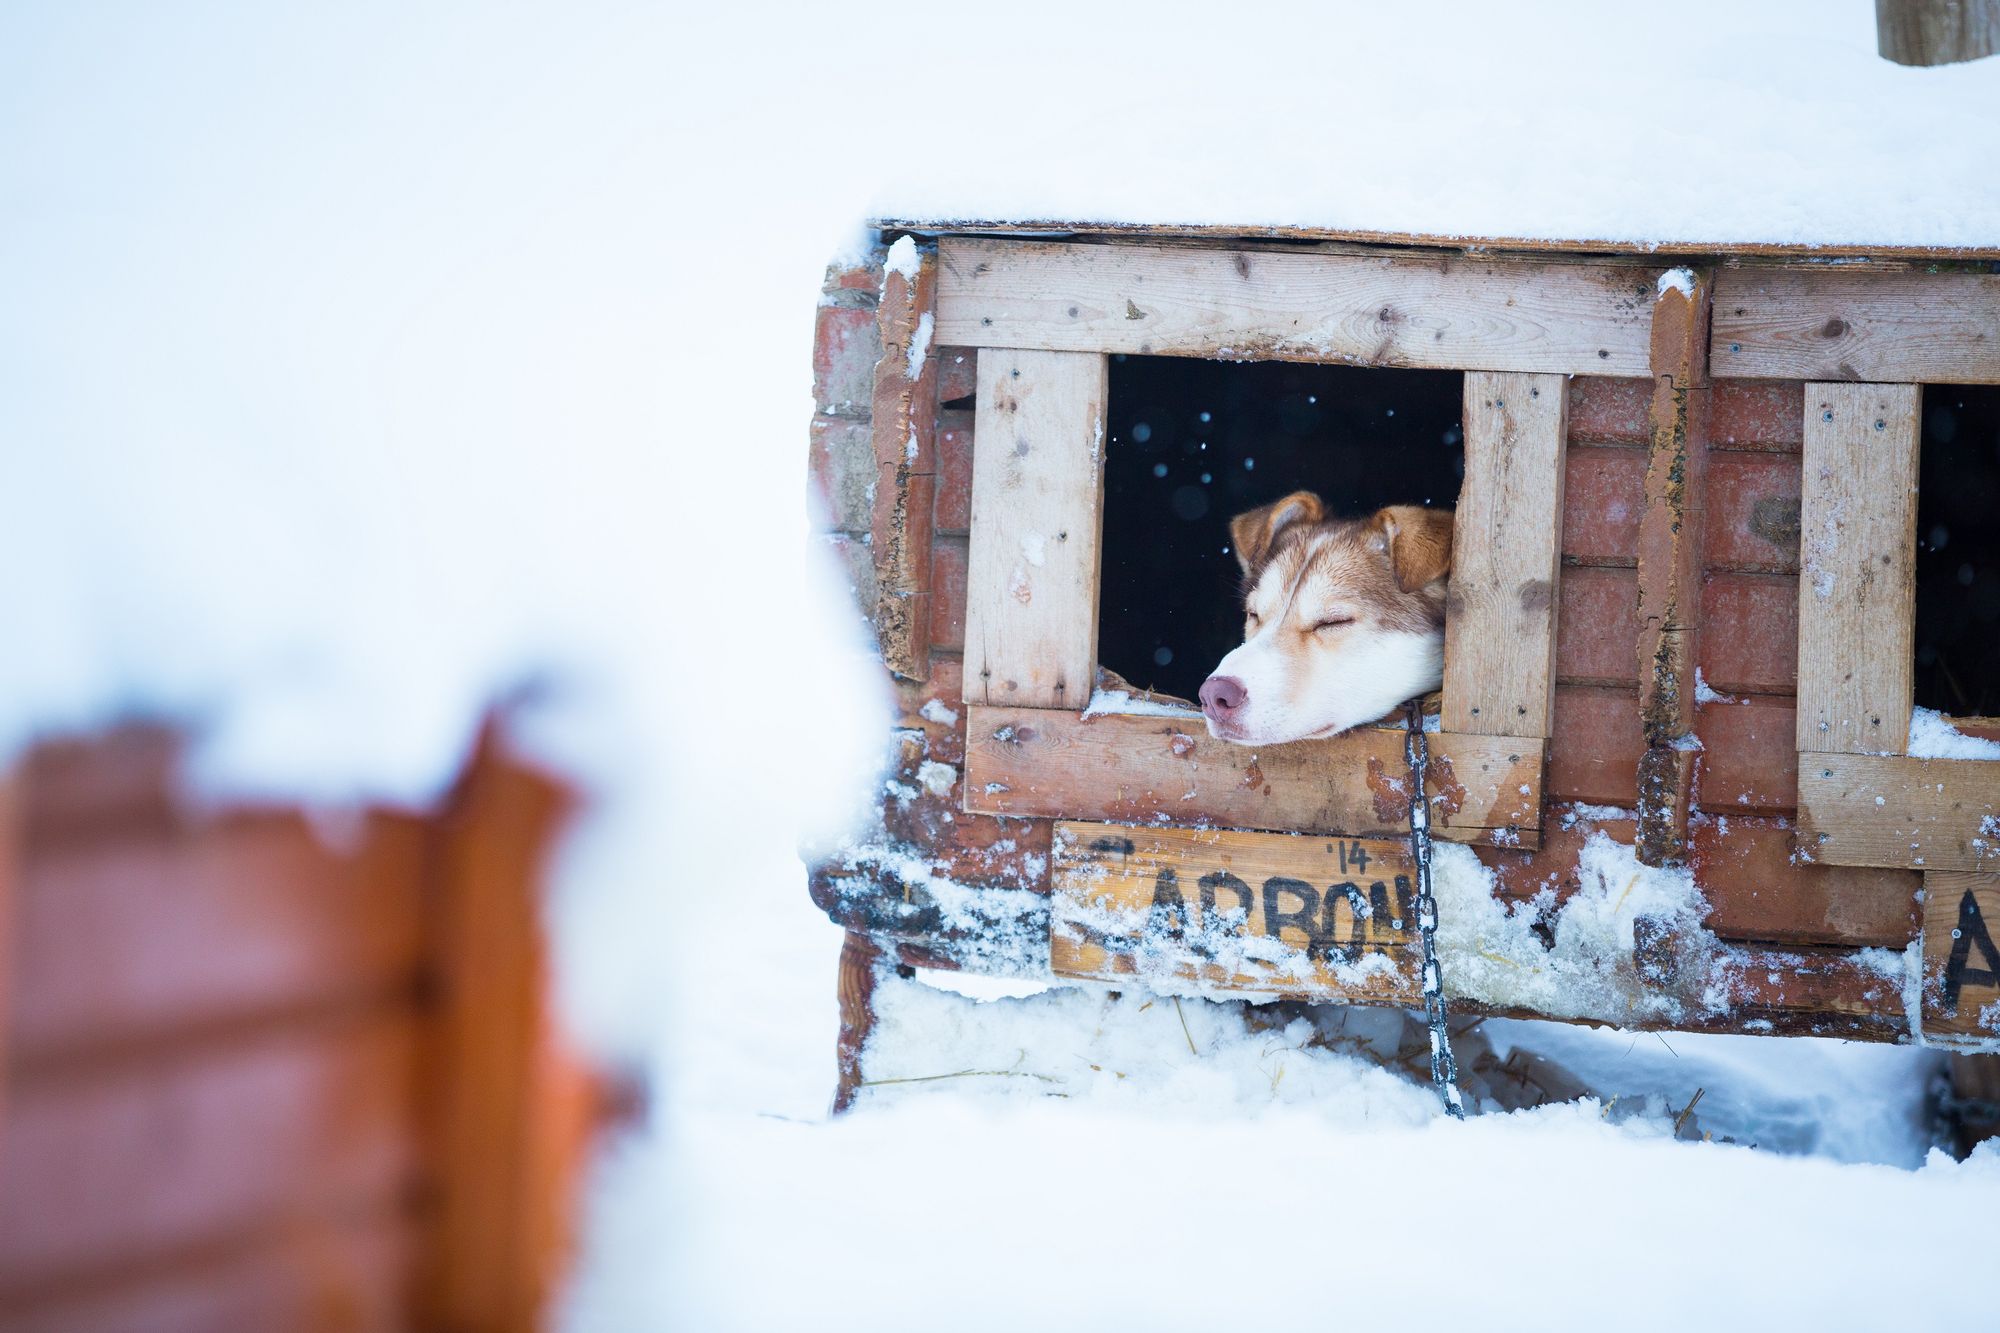 A sled dog pokes its head out of its kennel in snowy Tromso